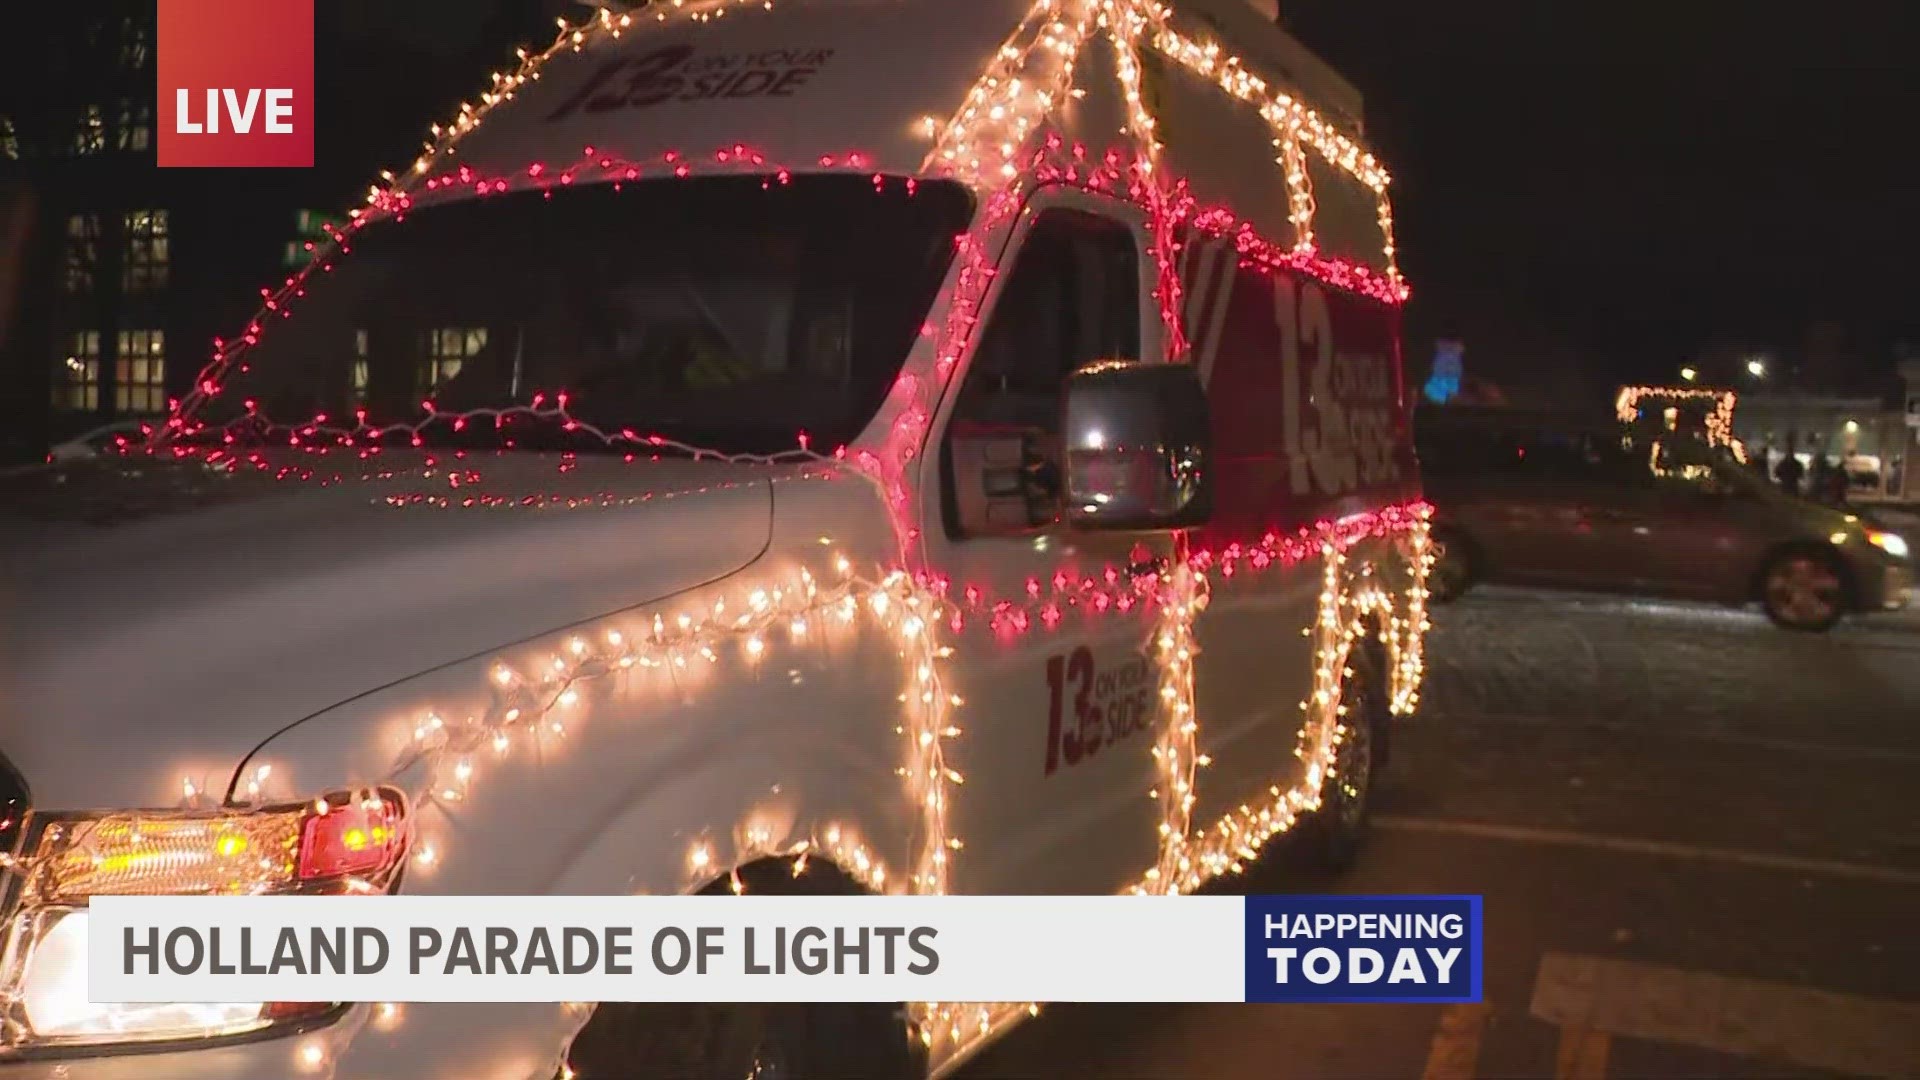 Live from the Holland Parade of Lights!